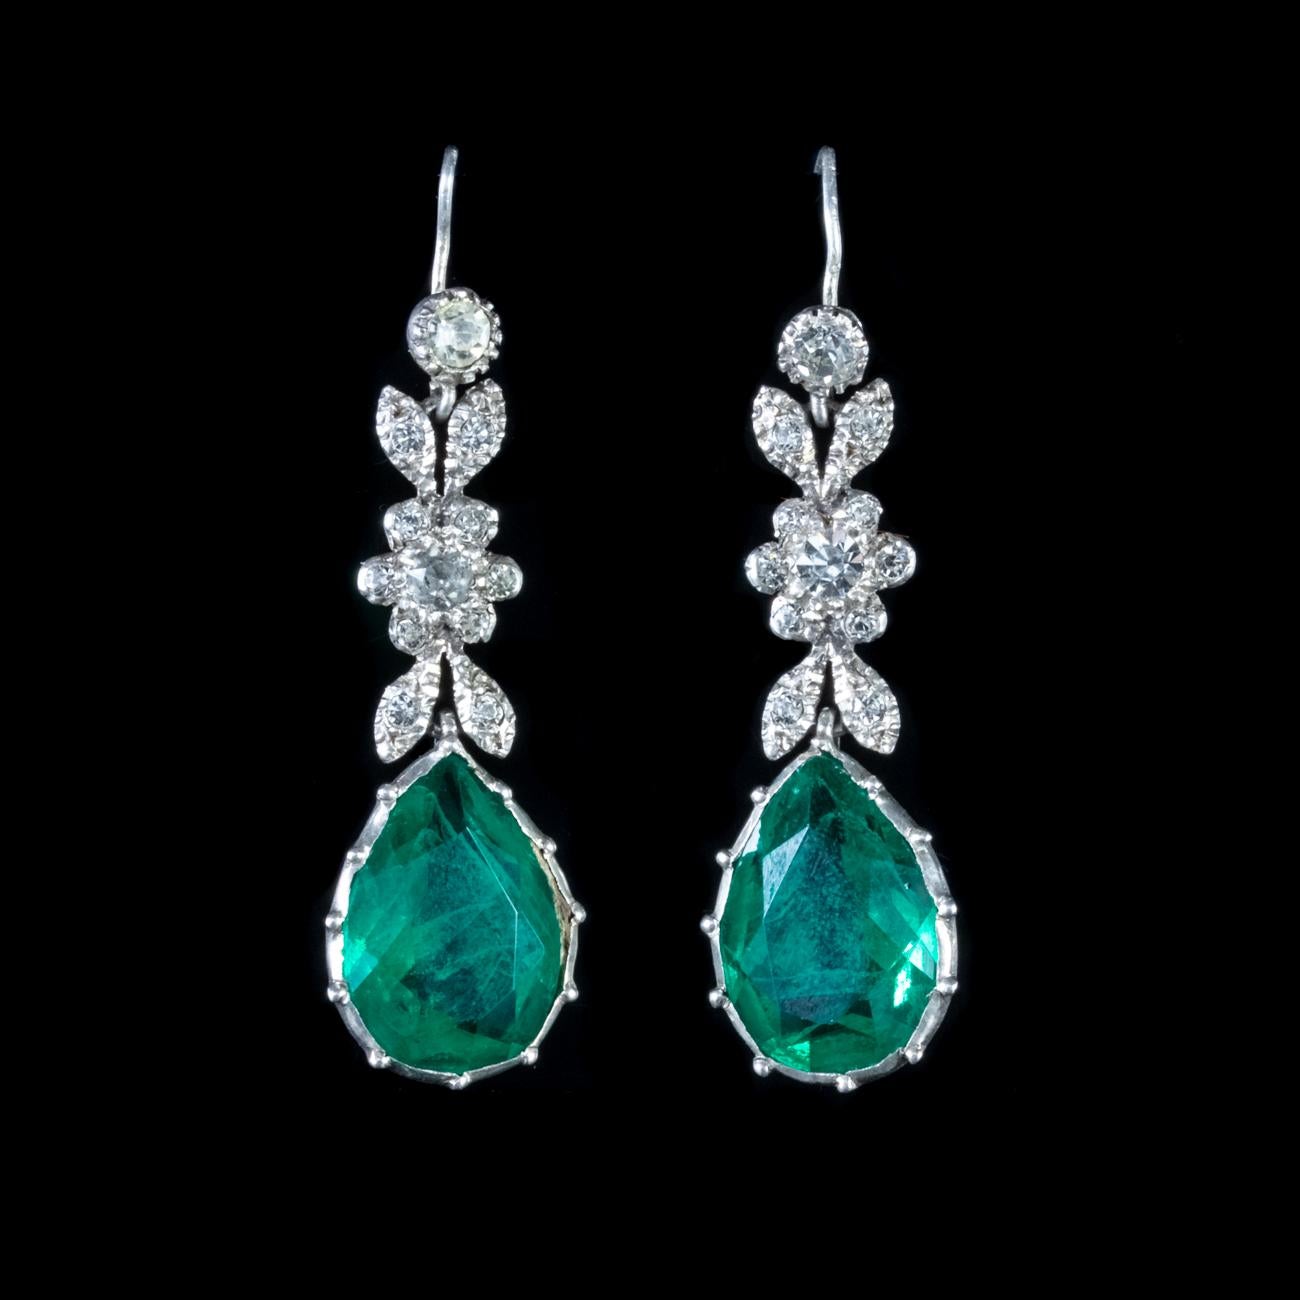 These gorgeous Antique Victorian earrings are modelled in Silver to form beautiful floral shapes. Each earring is set with an array of white Paste stones into the floral sections and below sits a large green Paste dropper, which shines like a